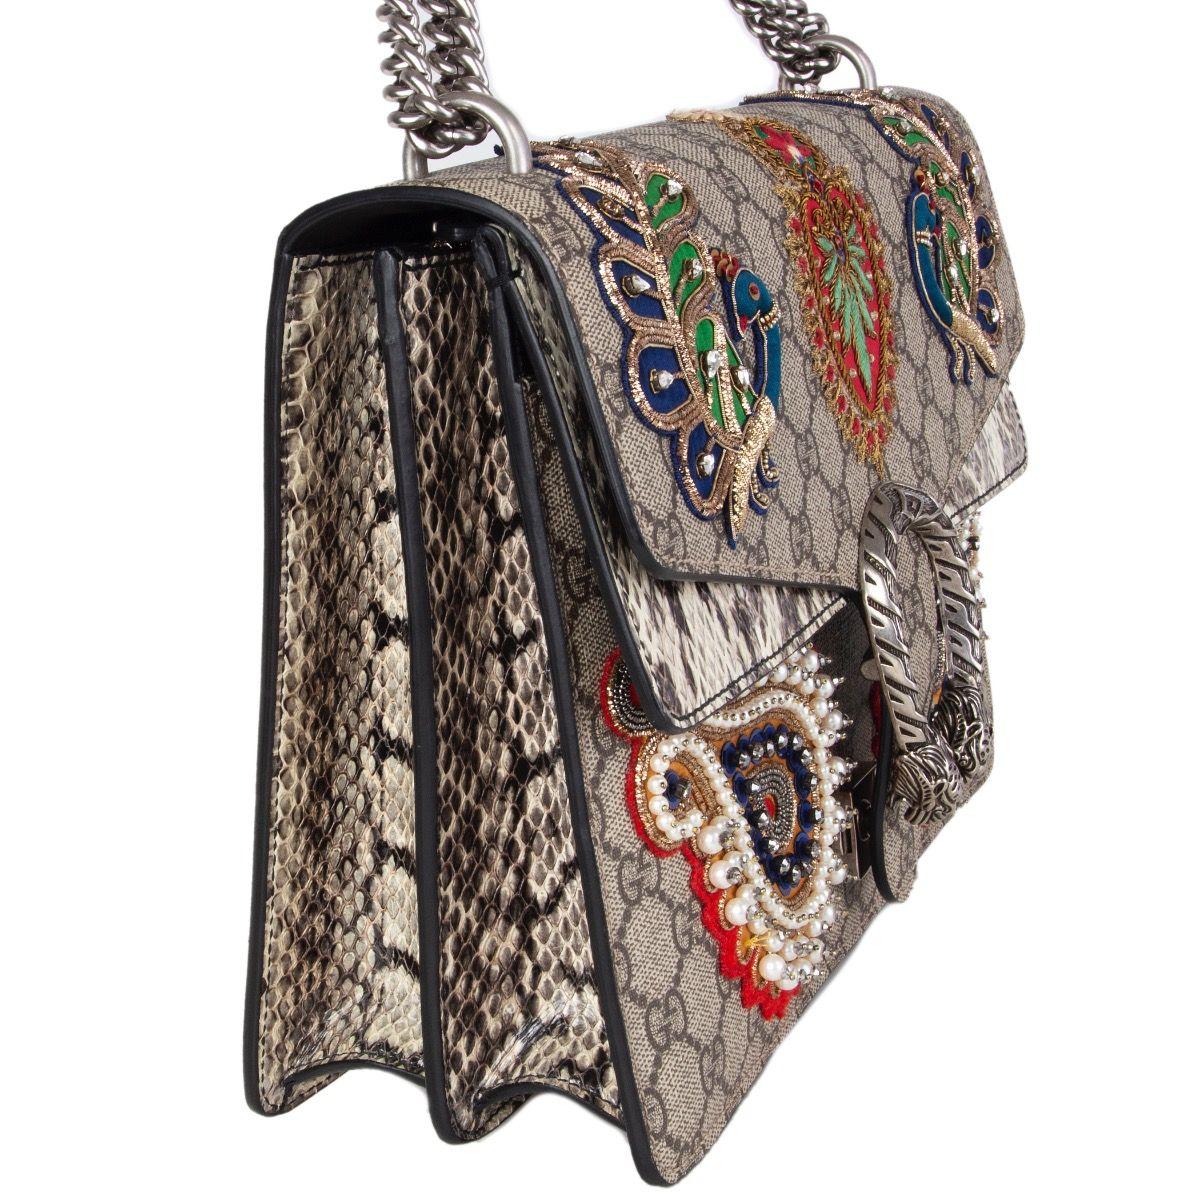 Gucci 'Dionysus GG Supreme' embellished shoulder bag featuring a foldover top with push-lock closure, with accordion details at sides. Peacock embroidery with metallic embellishments and rhinestones. Beaded paisly pearl embroidery. Snakeskin effect